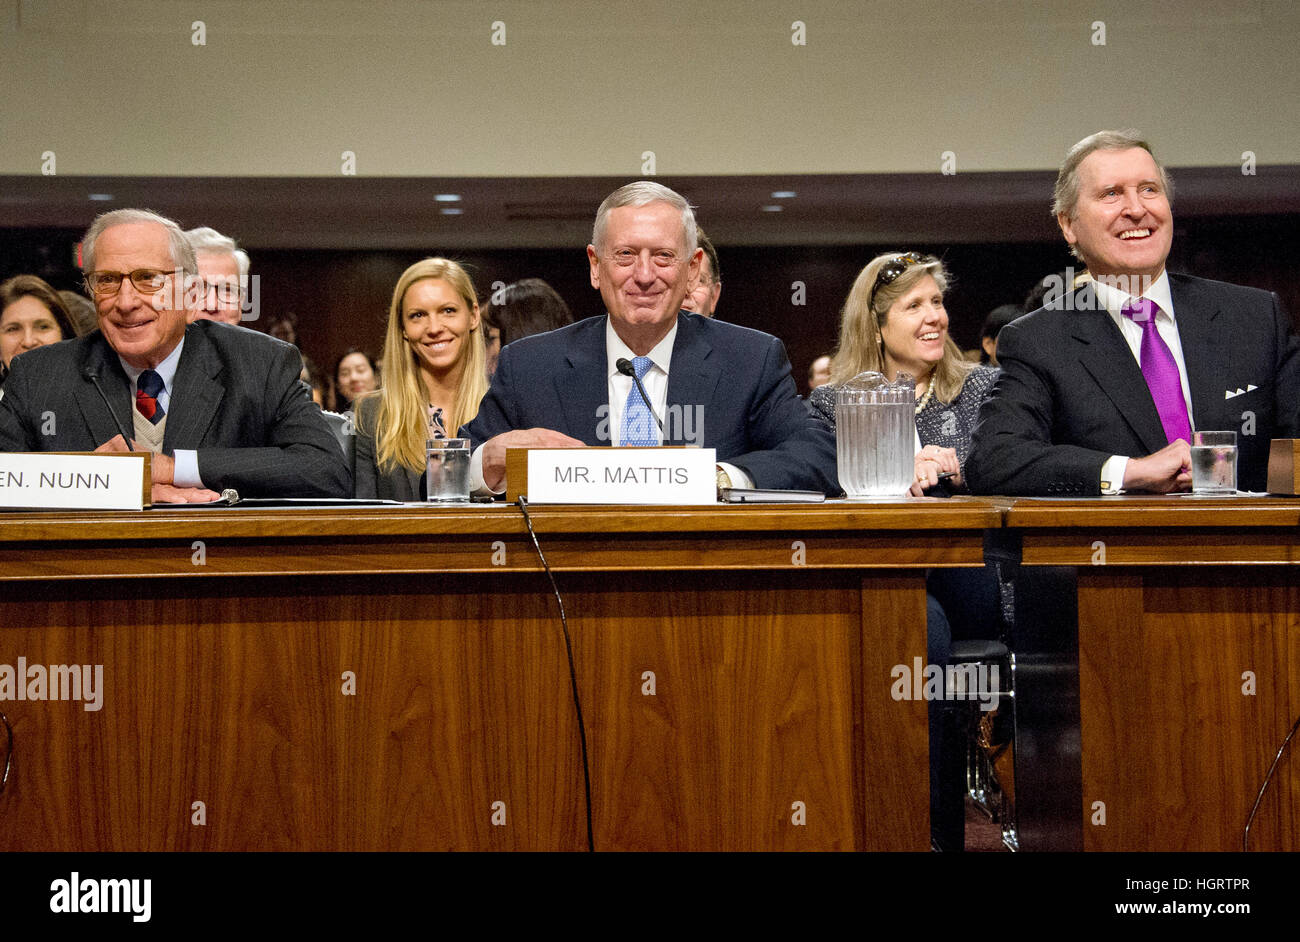 Washington DC, USA. 12th January 2017. Former United States Senator Sam Nunn (Democrat of Georgia), left, and former US Secretary of Defense William Cohen, right, appear before the United States Senate Committee on Armed Services as it holds a confirmation hearing on the nomination of US Marine Corps General James N. Mattis (retired), center, to be Secretary of Defense on Capitol Hill in Washington, DC on Thursday, January 12, 2017. Nunn and Cohen each introduced and endorsed Mattis for the post. Credit: MediaPunch Inc/Alamy Live News Stock Photo